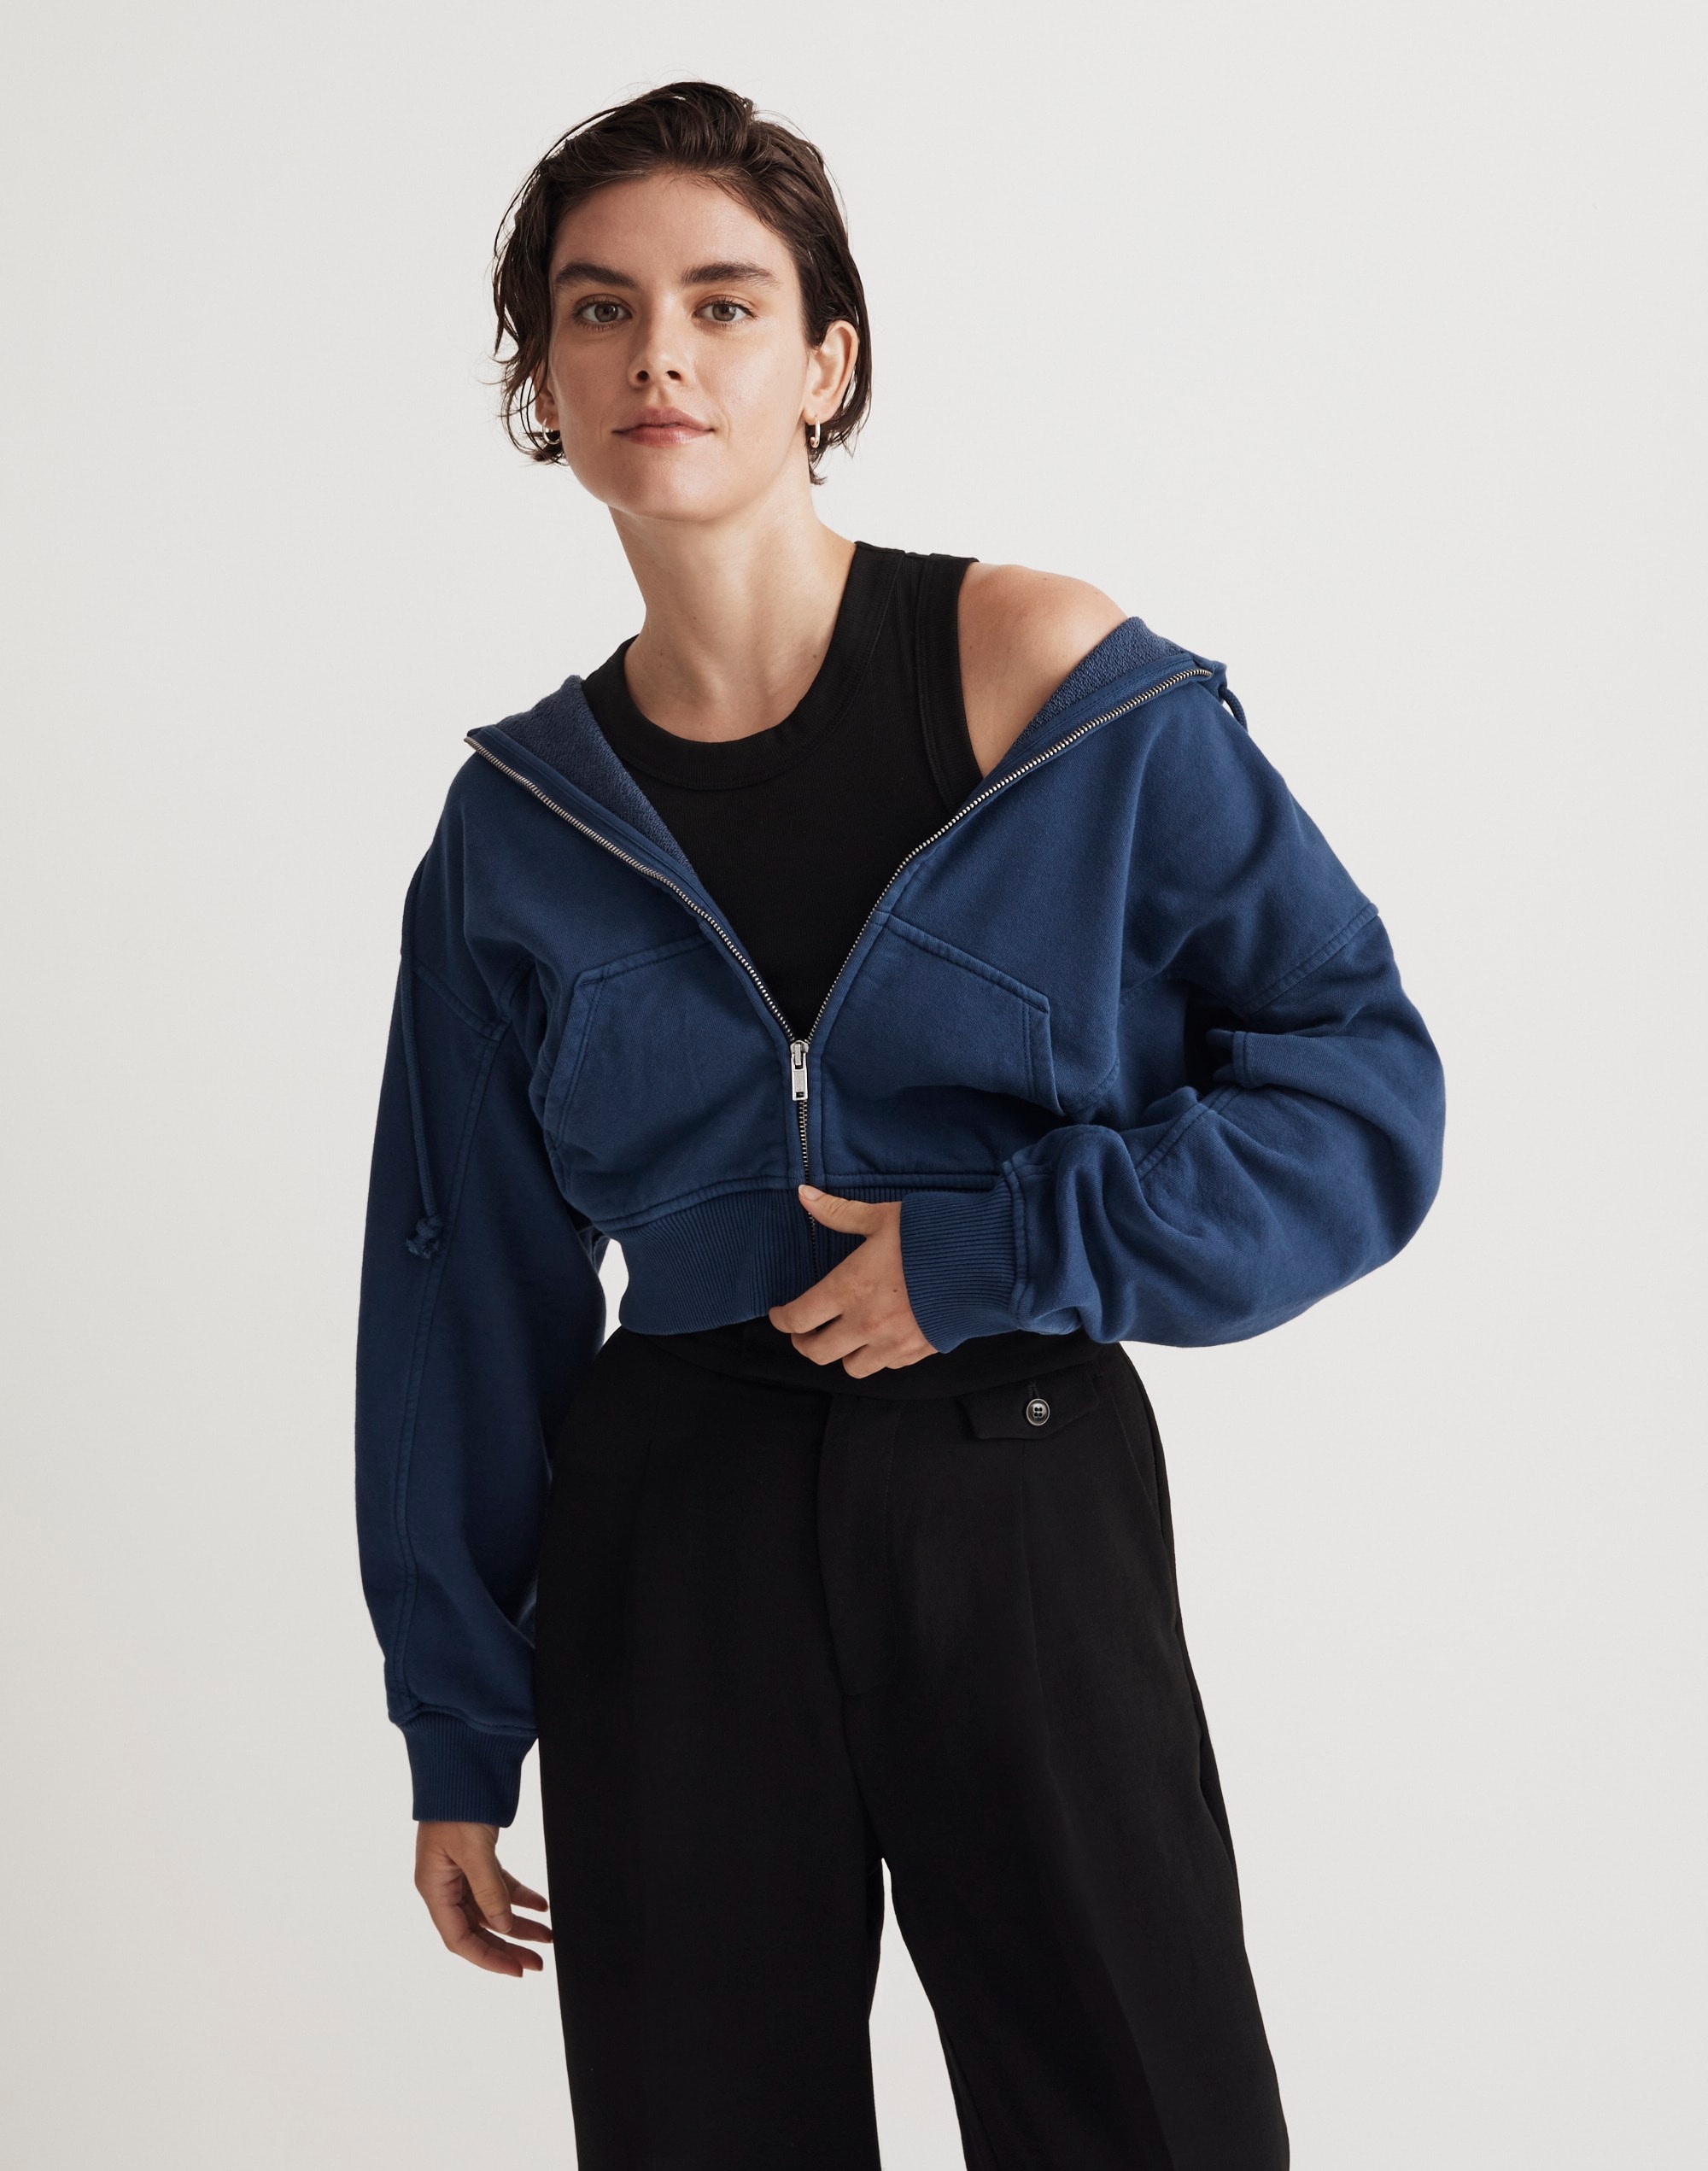 Madewell  Jeans, Clothing, Shoes & Bags for Women and Men